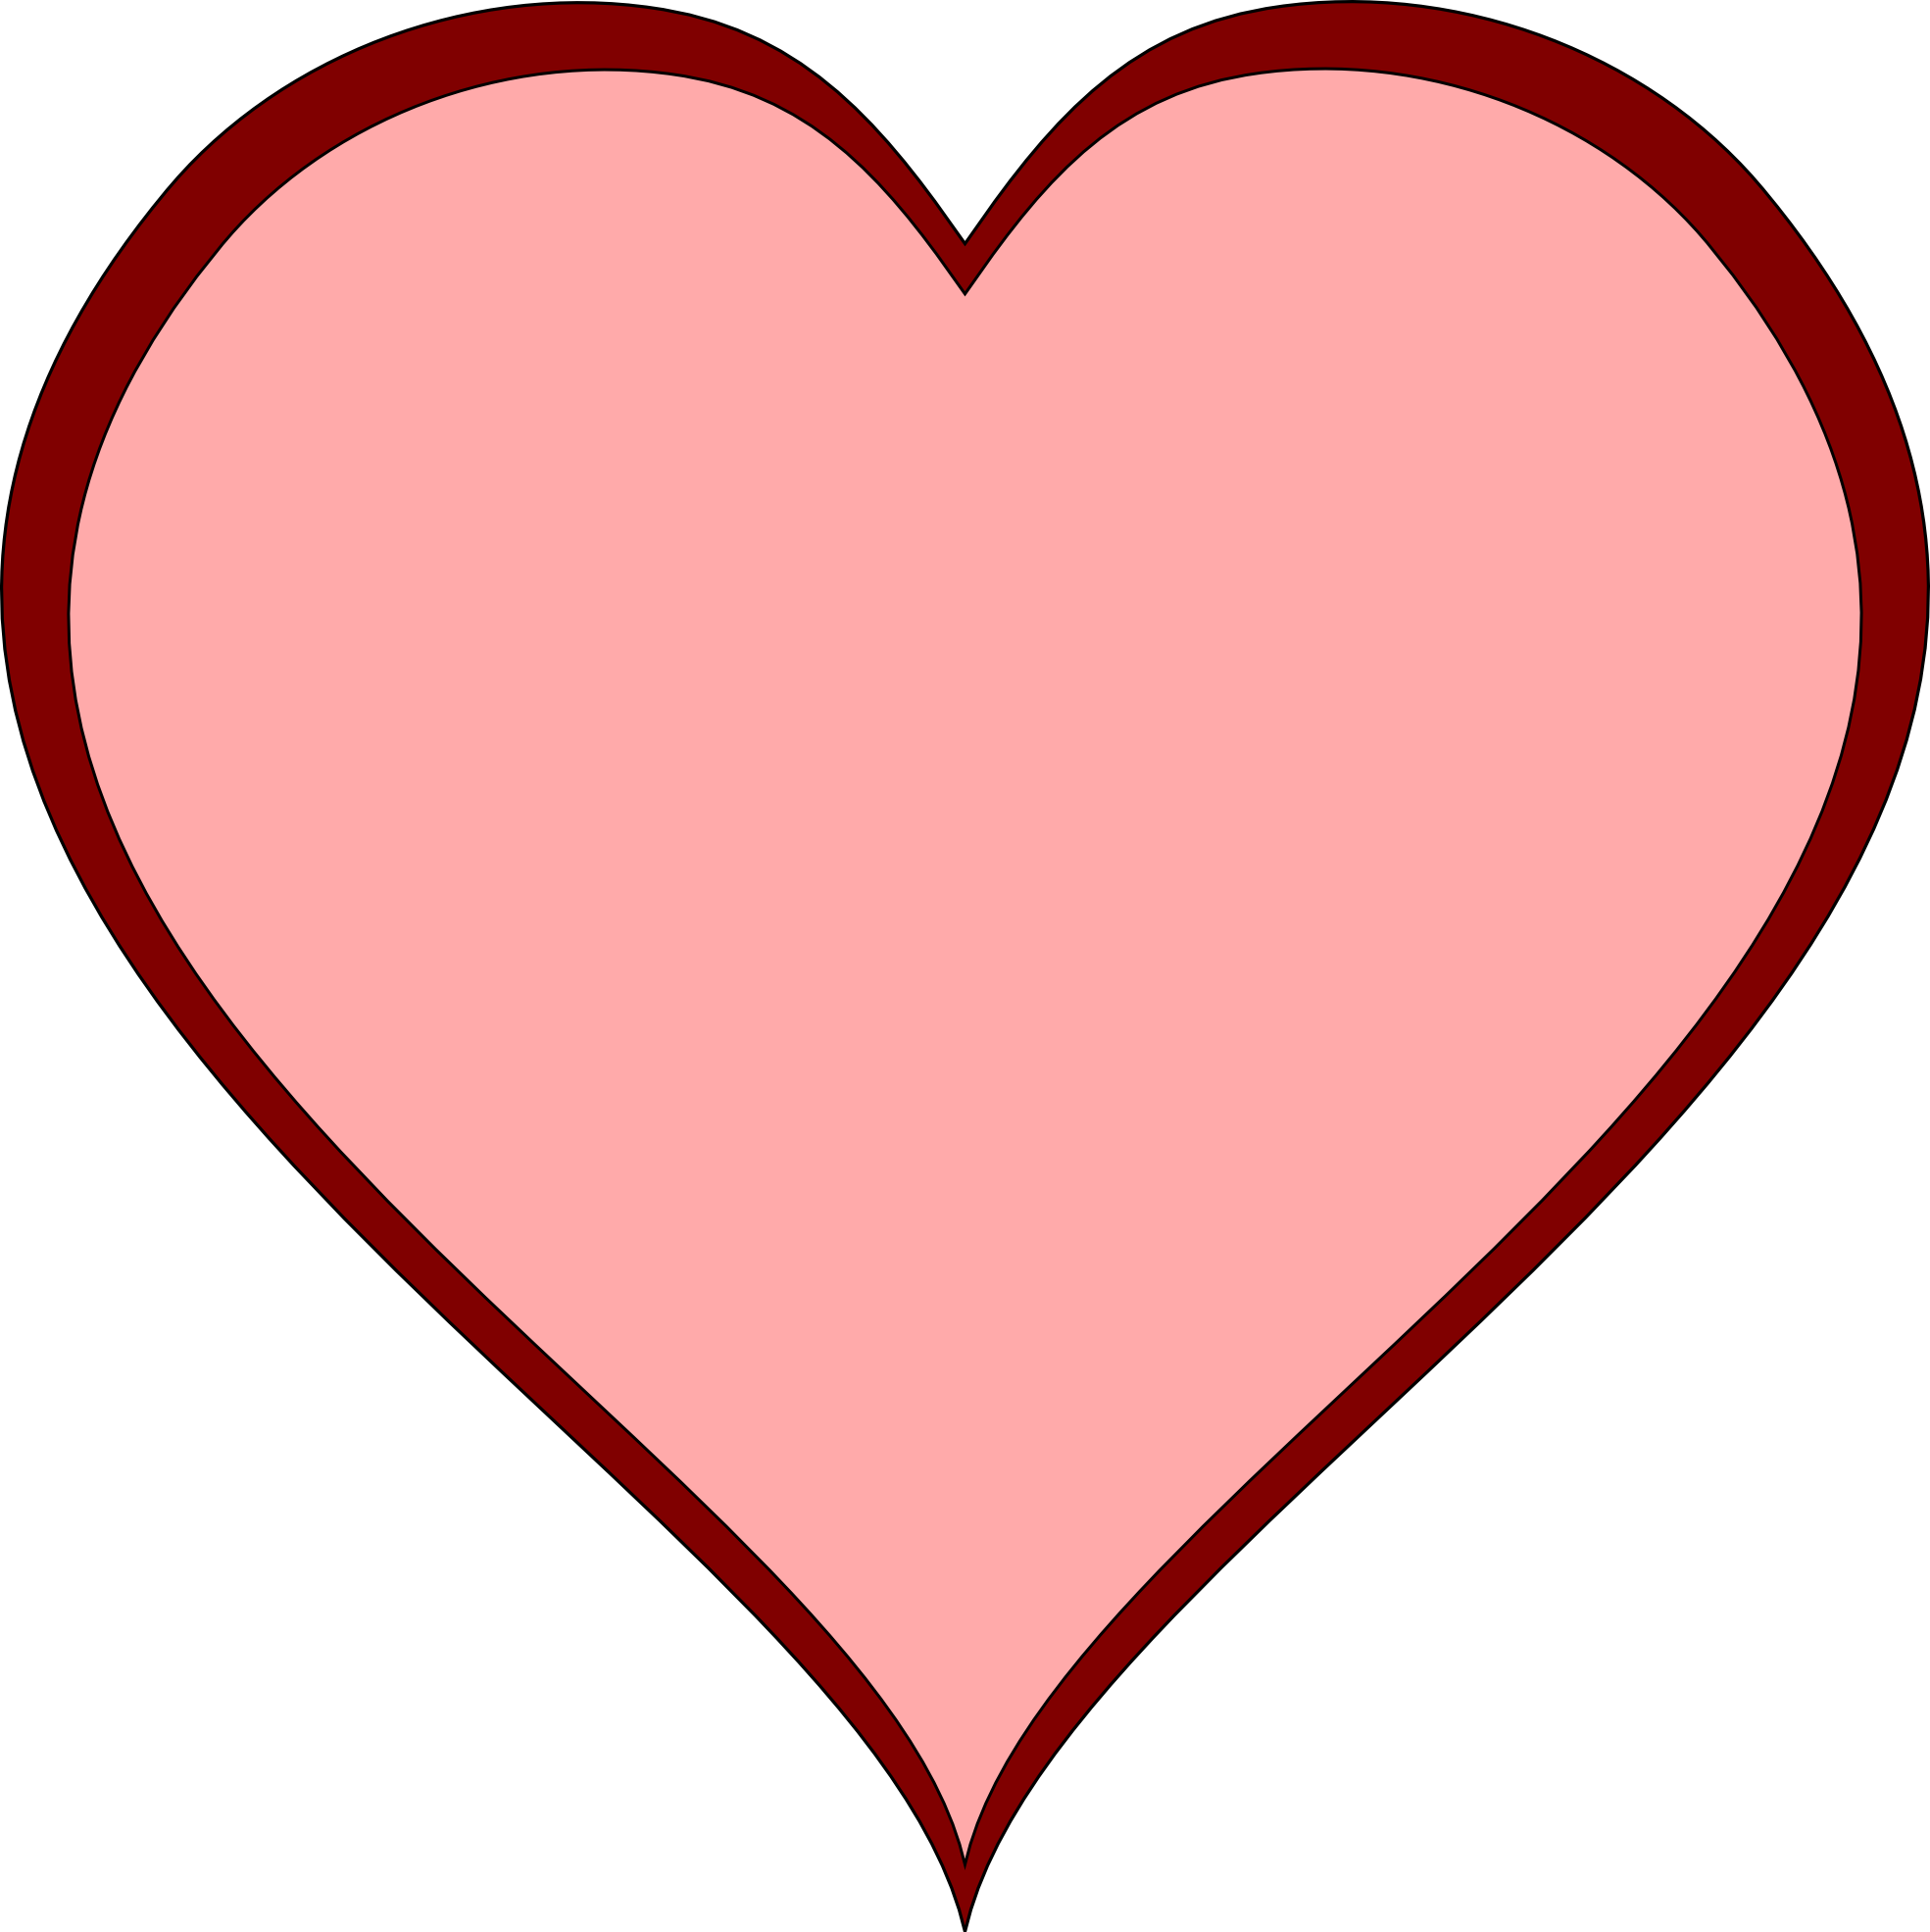 heart clipart free download - photo #27